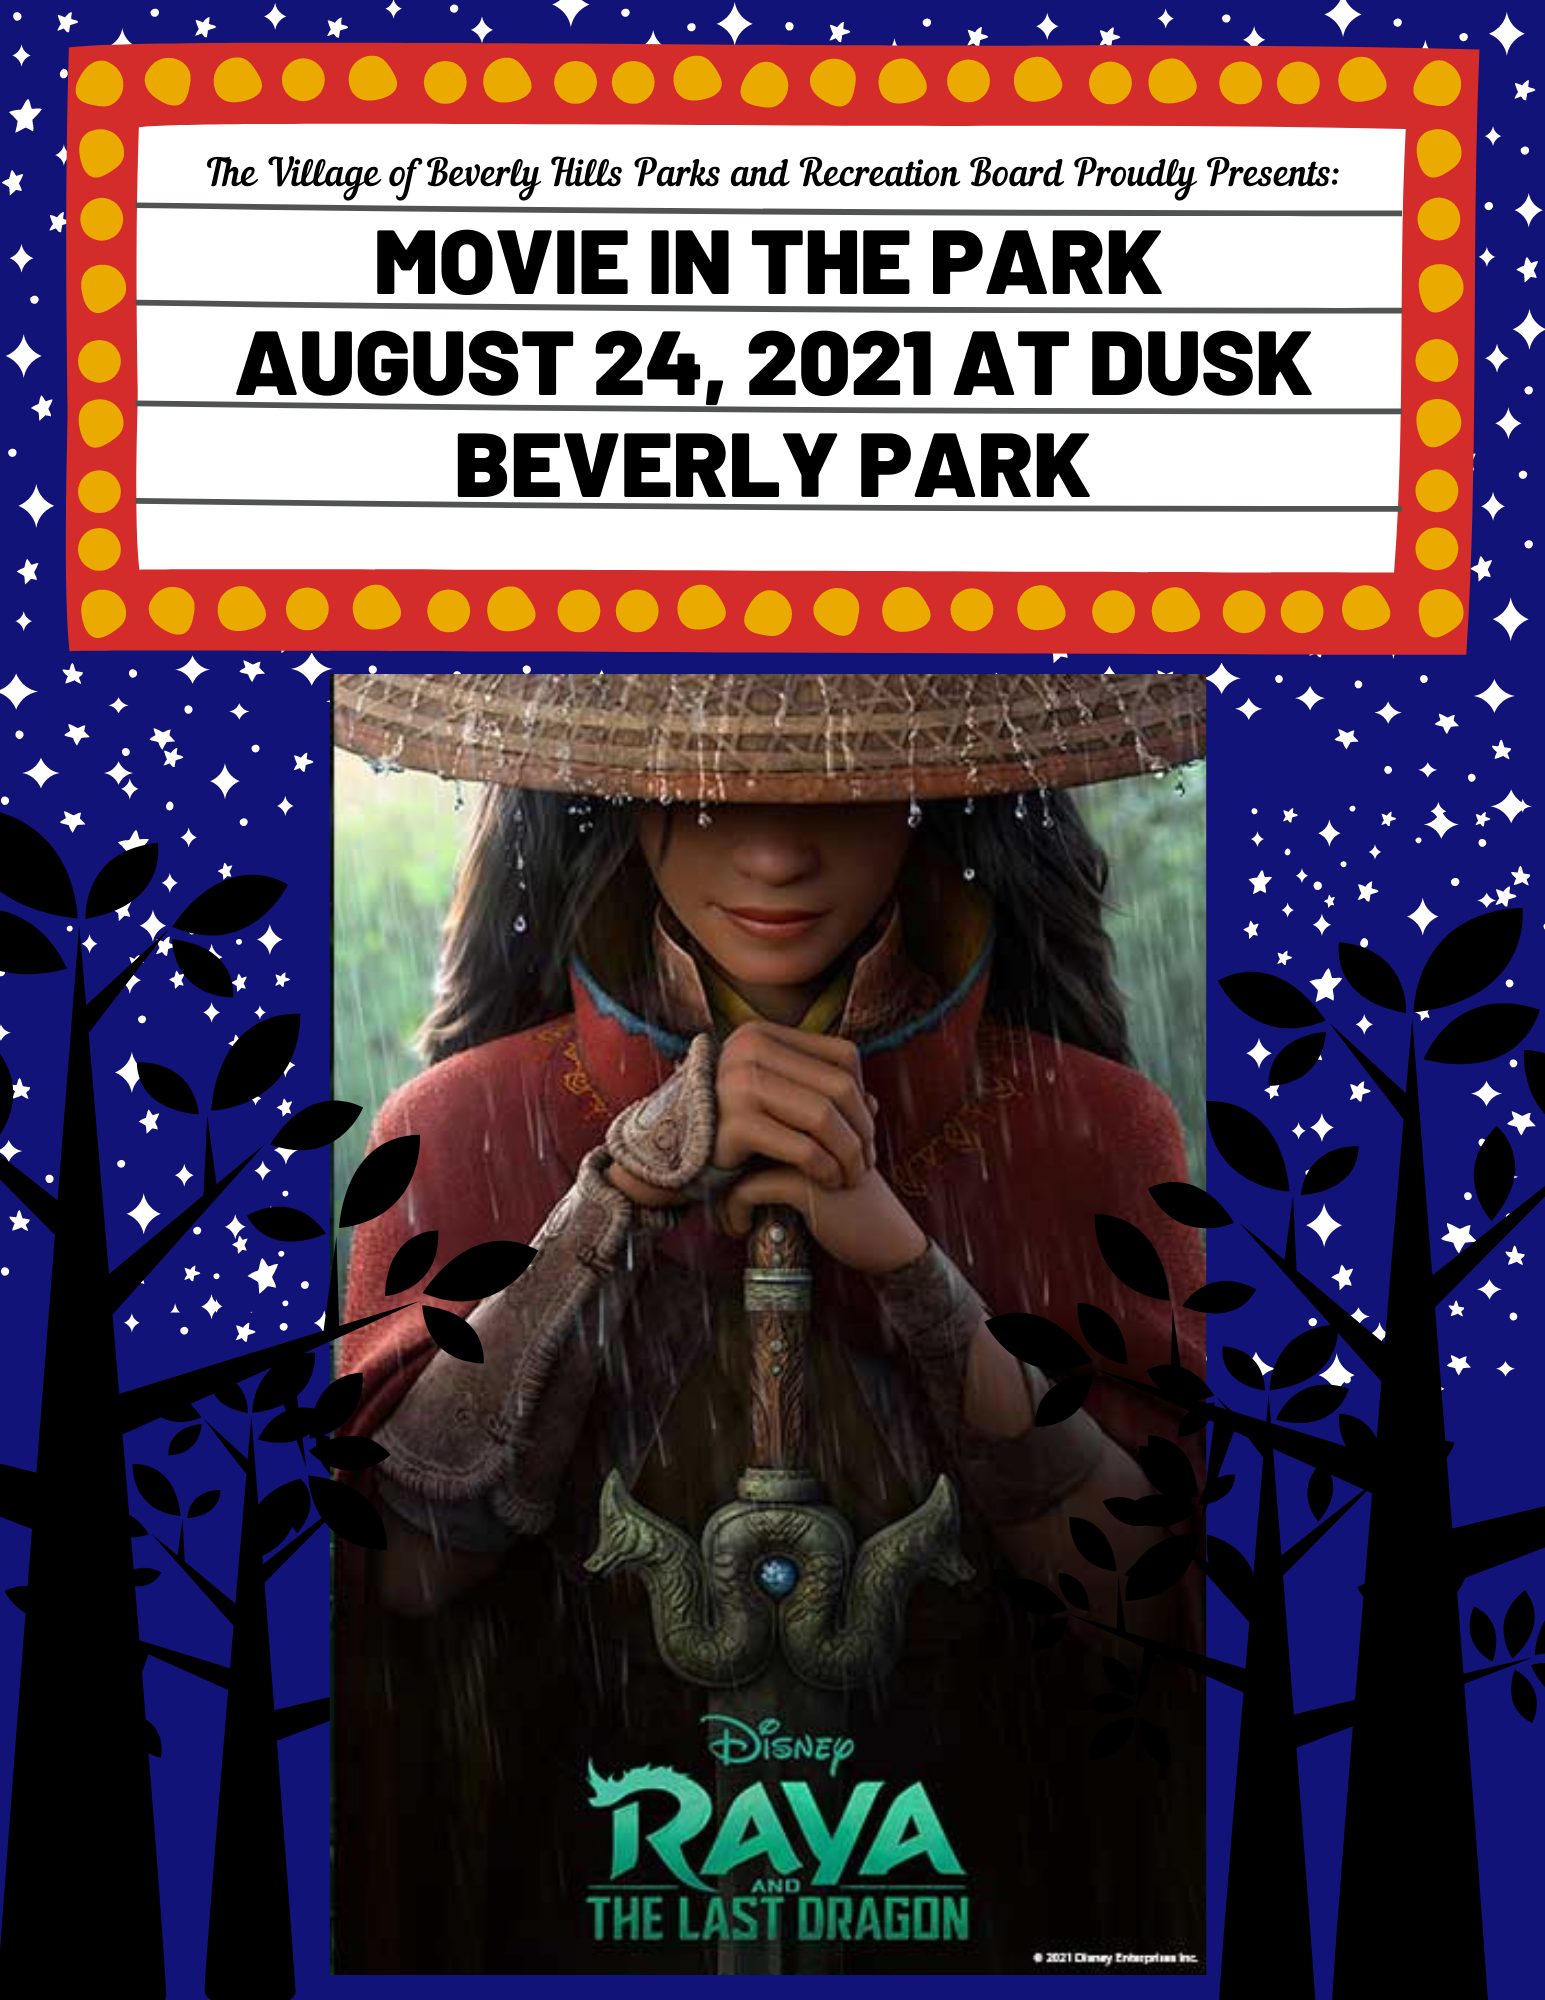 Movie in the Park August 24 2021